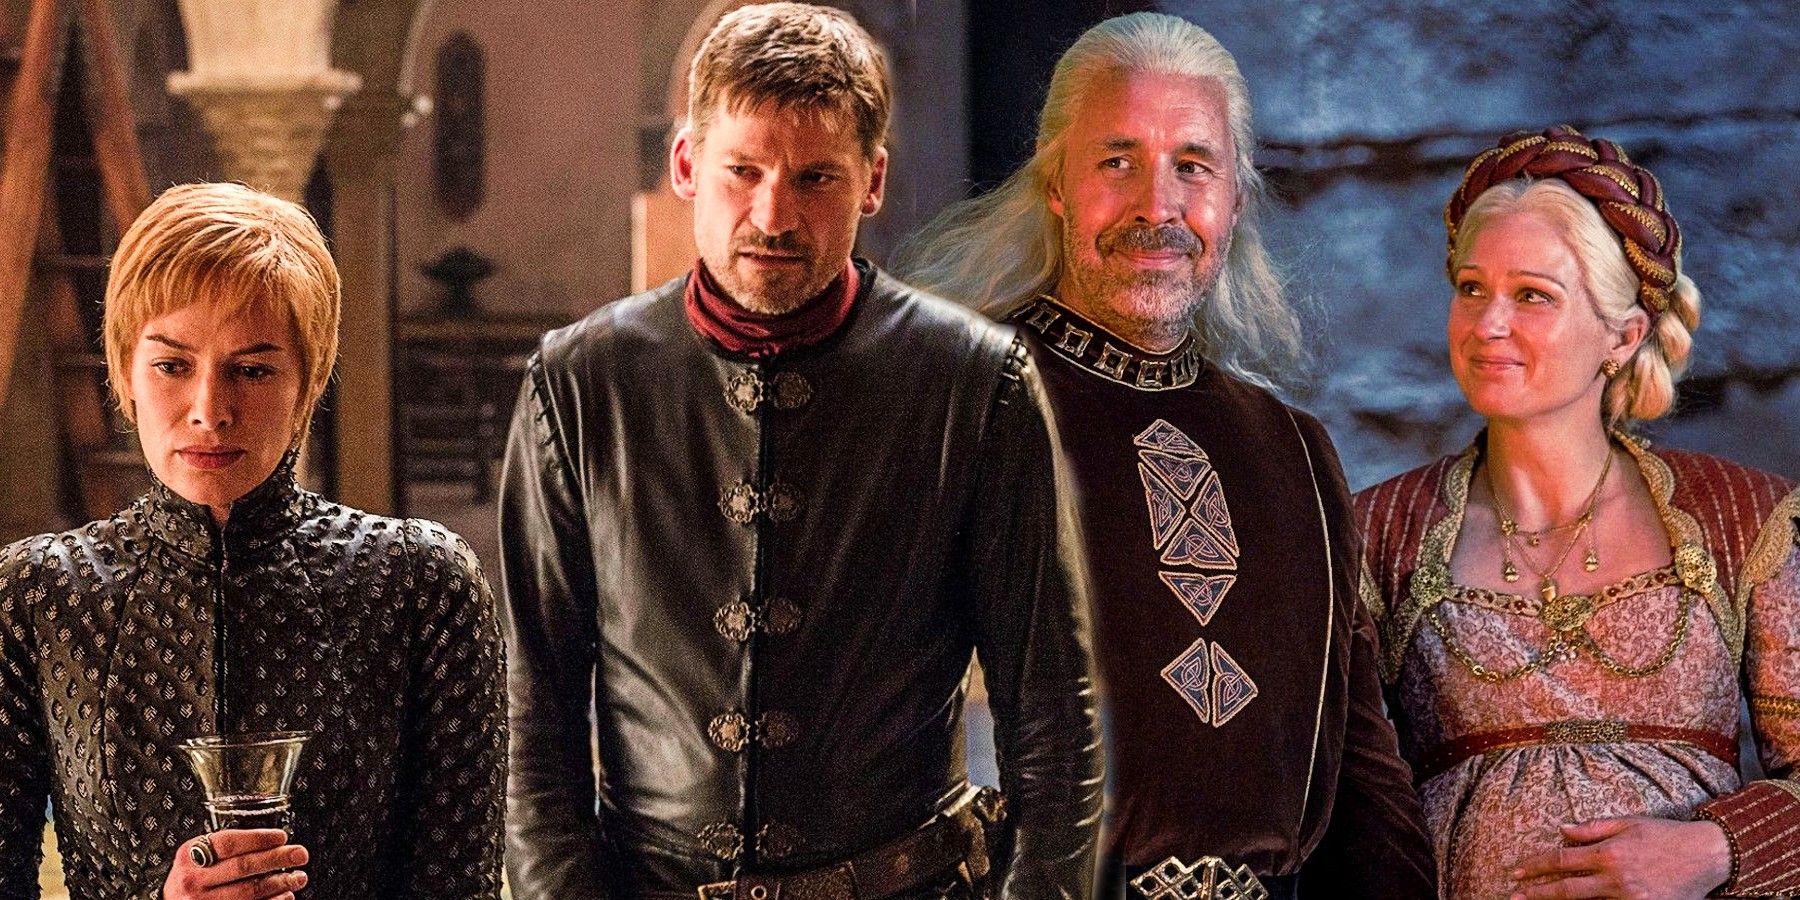 Game of Thrones' Cersei and Jaime Lannister, and House of the Dragon's King Viserys and Queen Aemma